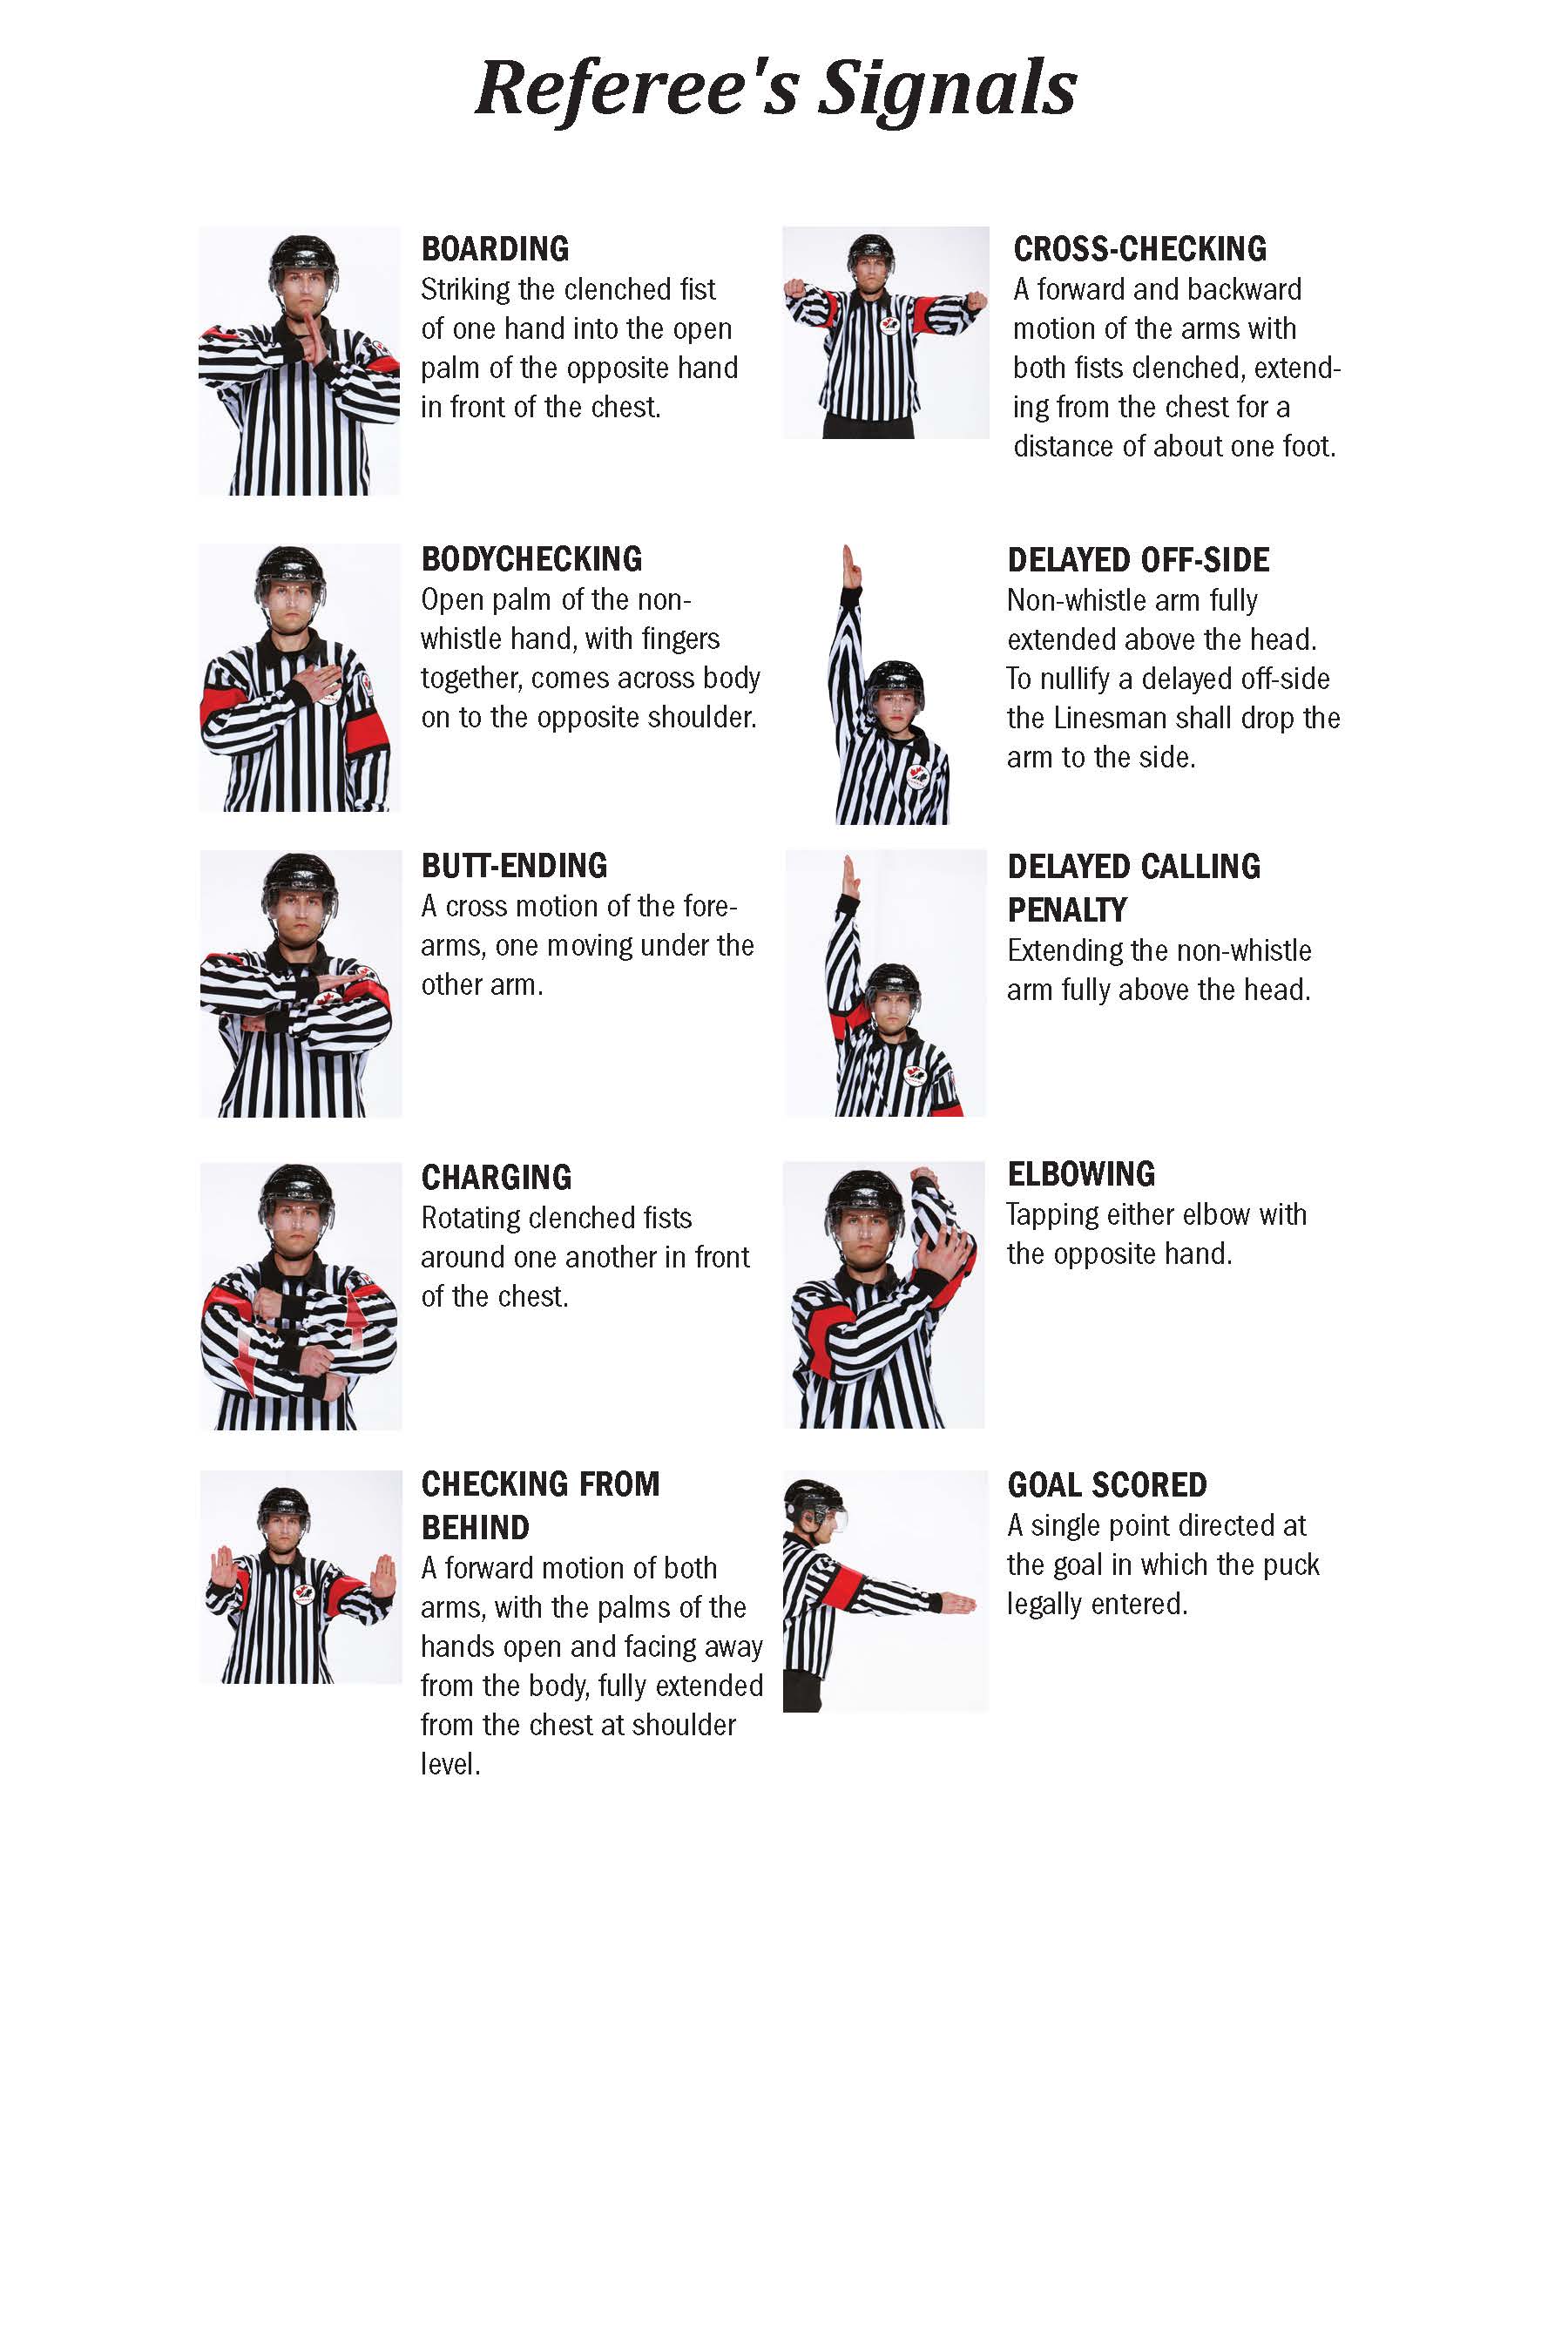 Referee Signals_Page_1